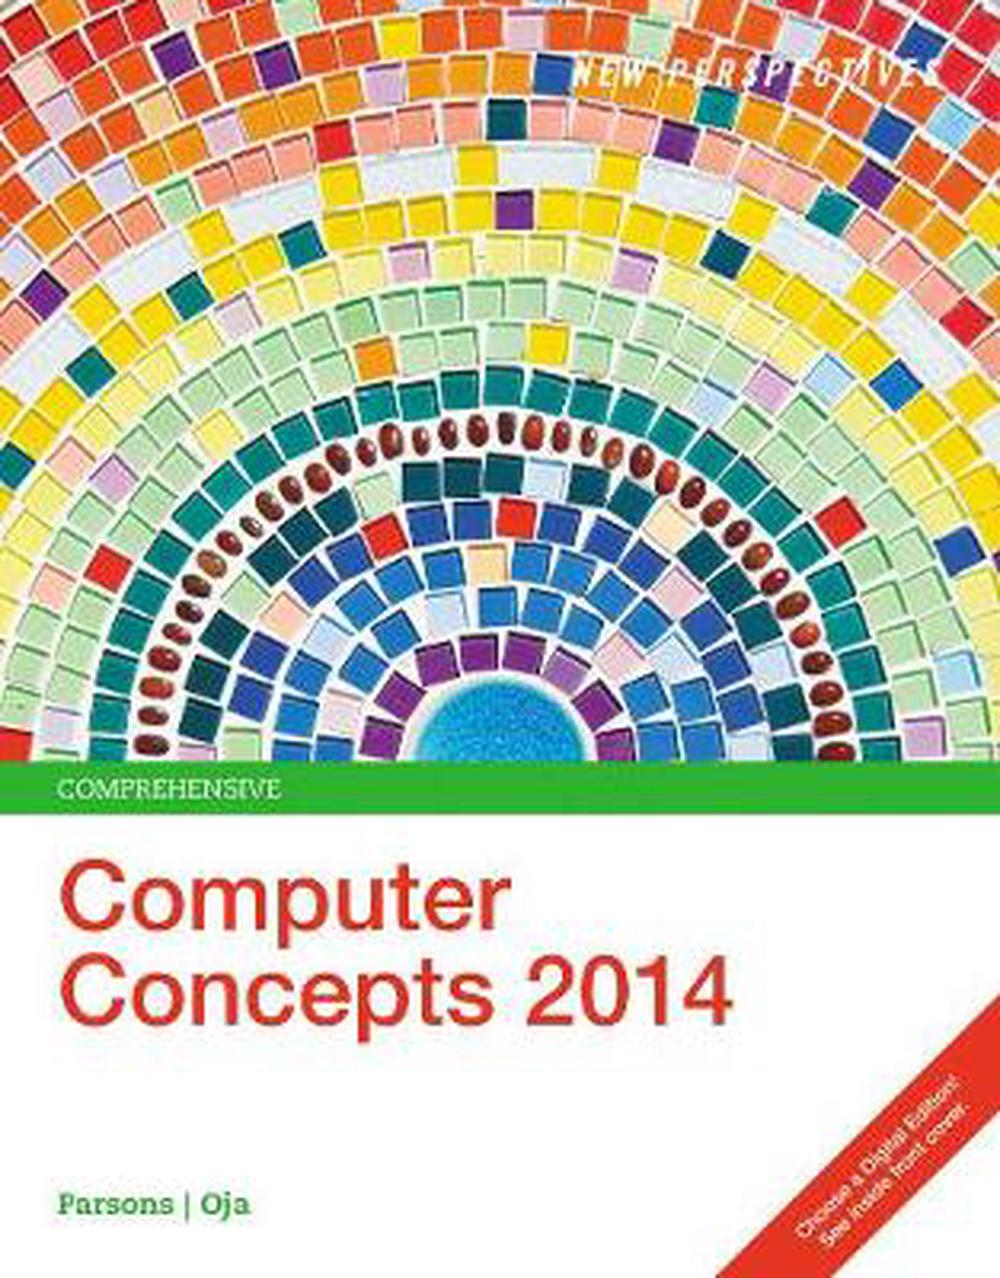 New Perspectives on Computer Concepts 2014 Comprehensive by June